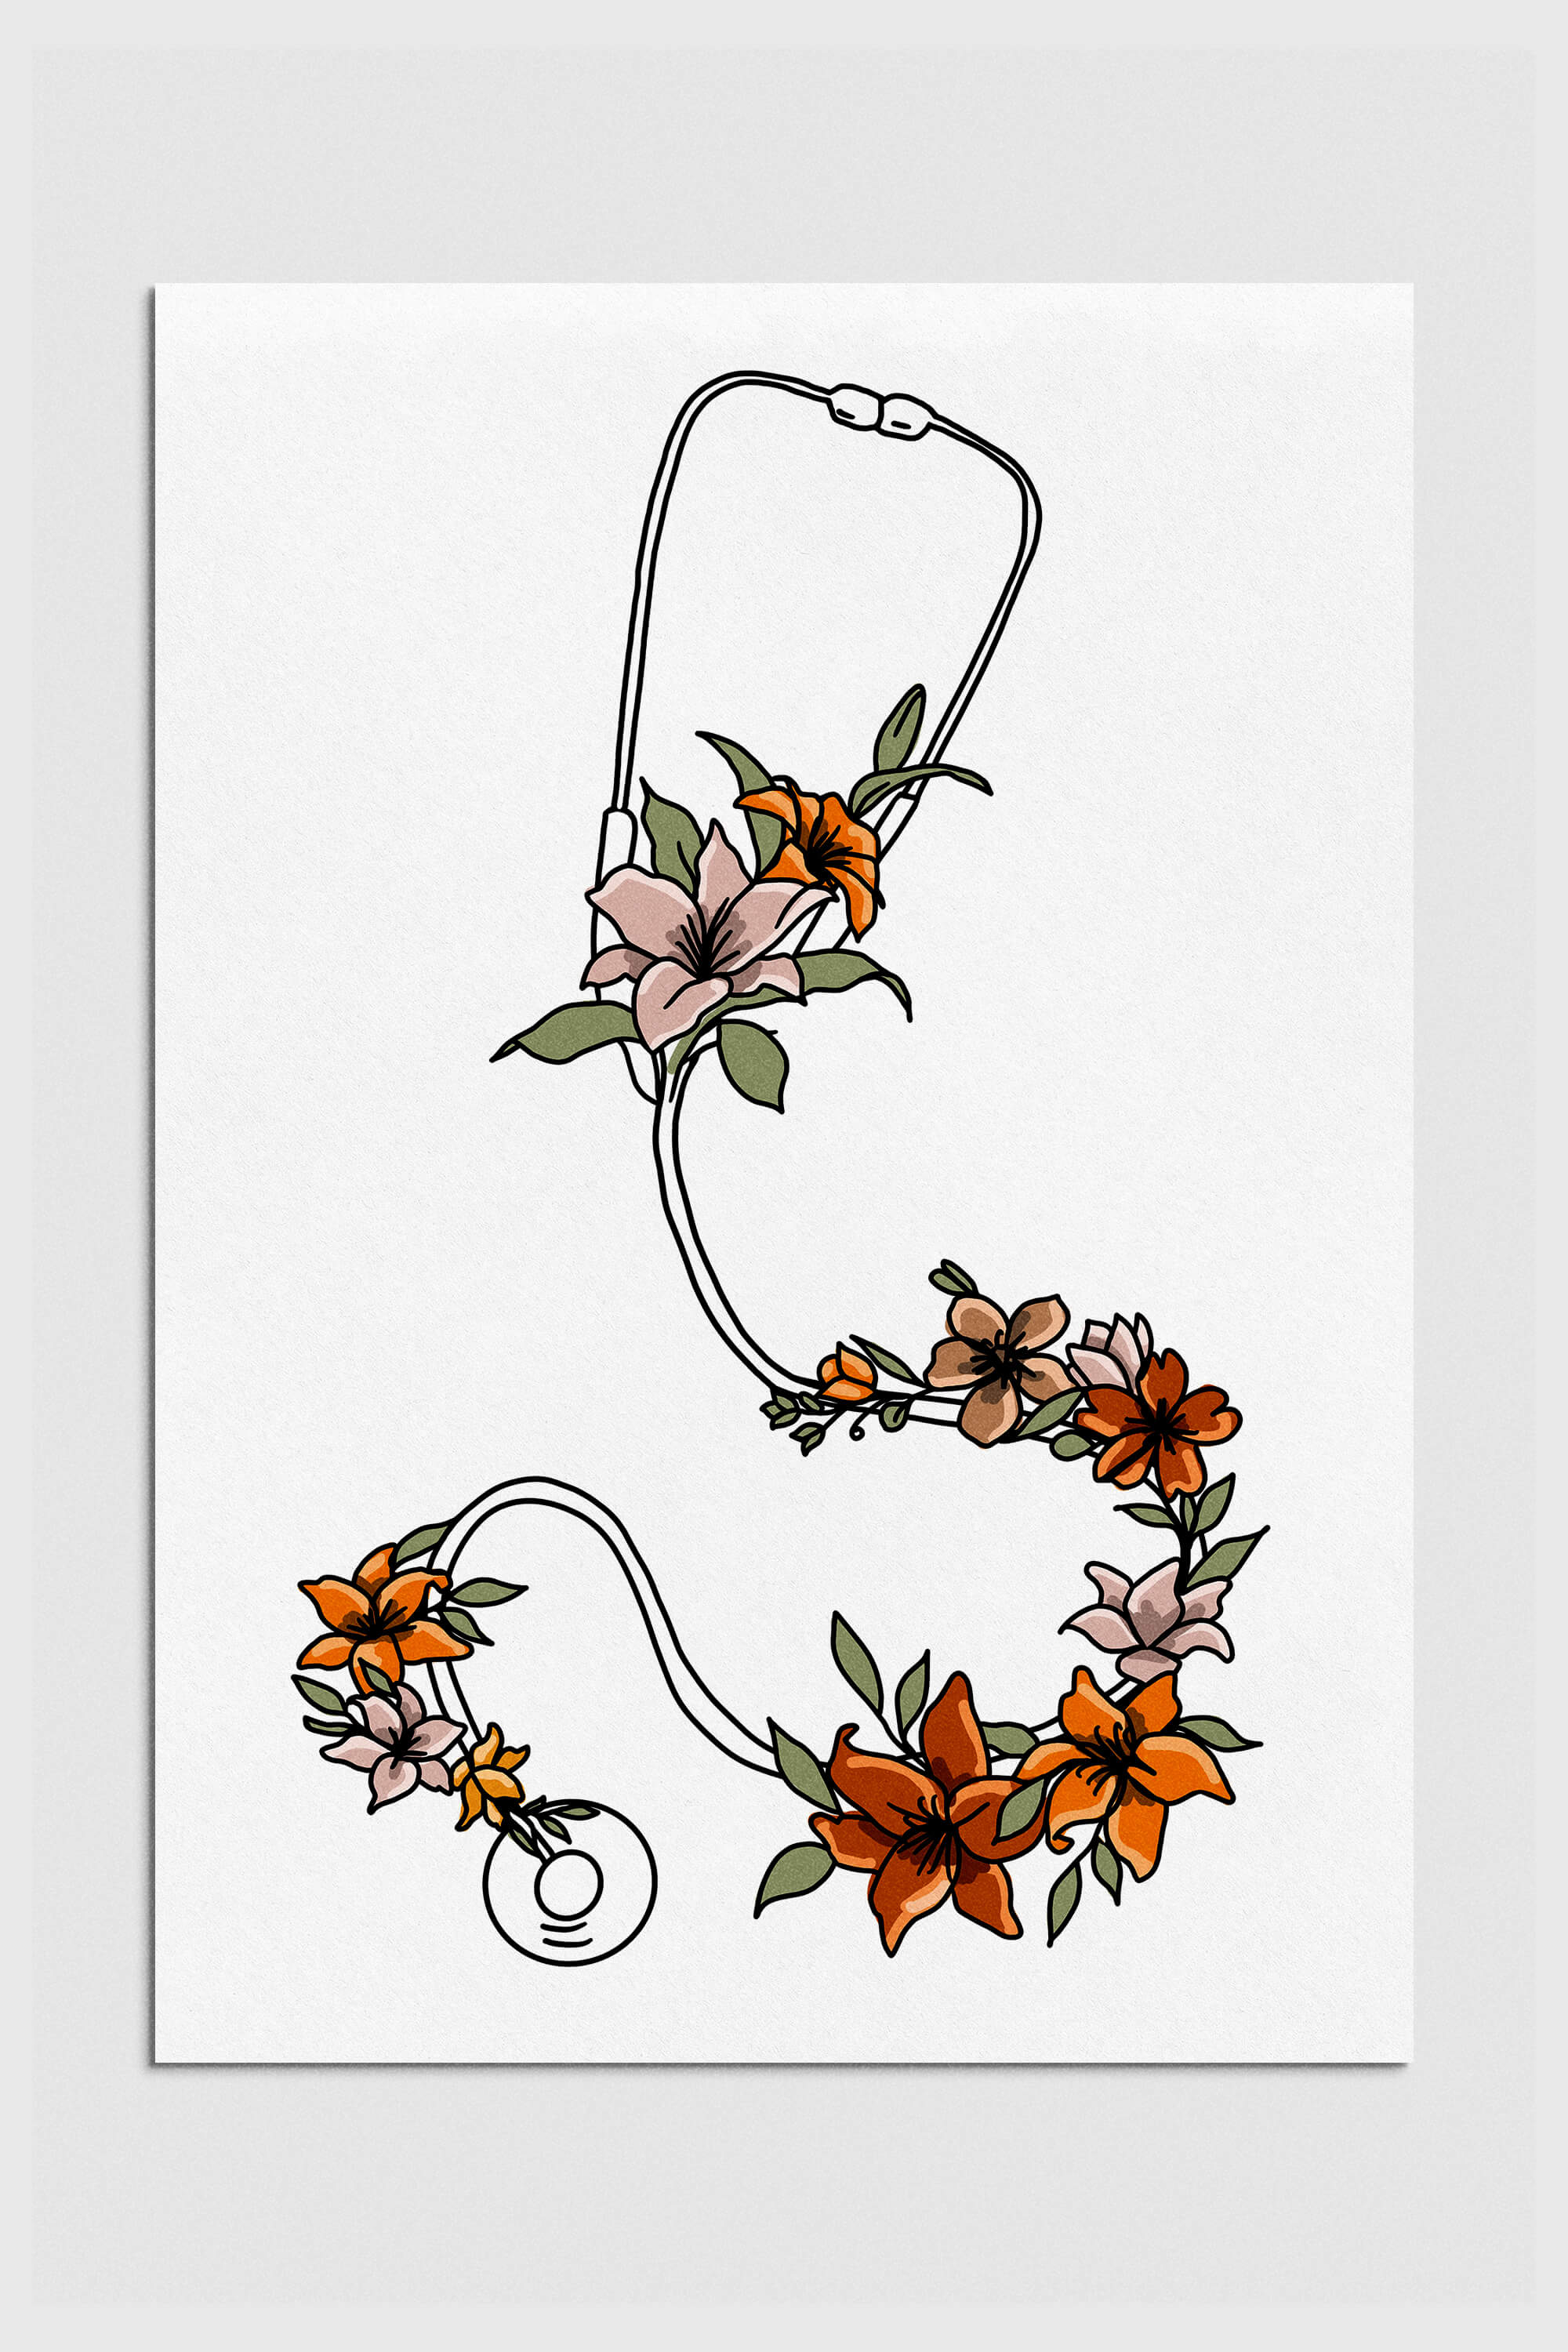 Artistic floral stethoscope print, a vibrant and colorful decor piece perfect for nurse's stations or medical offices.